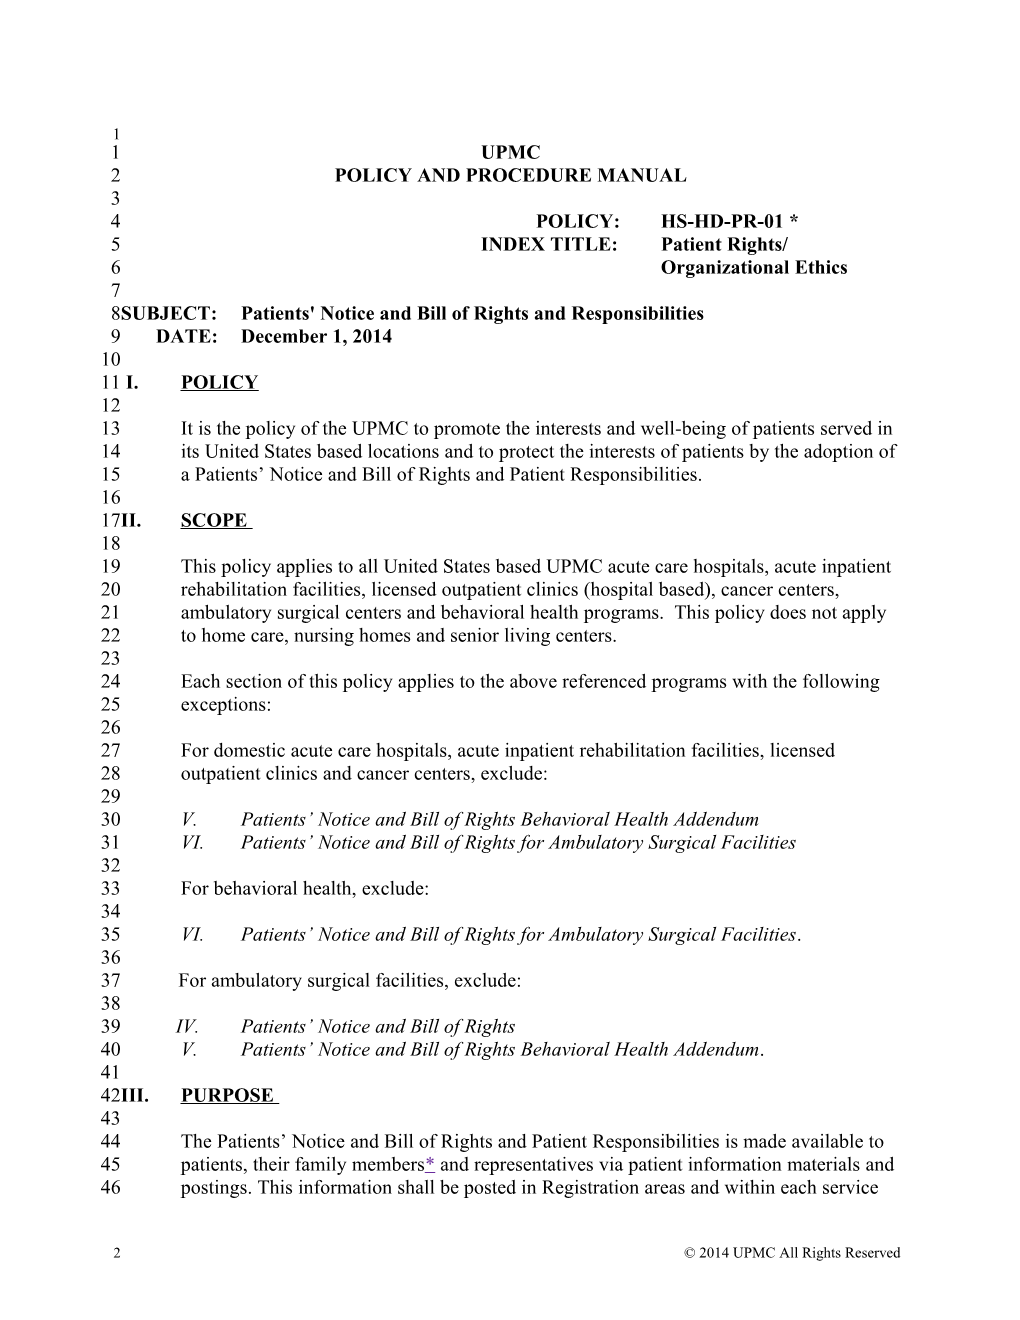 UPMC Hospital Divsion Policy: Patients' Bill of Rights and Responsibilities (HS-HD-PR-01)